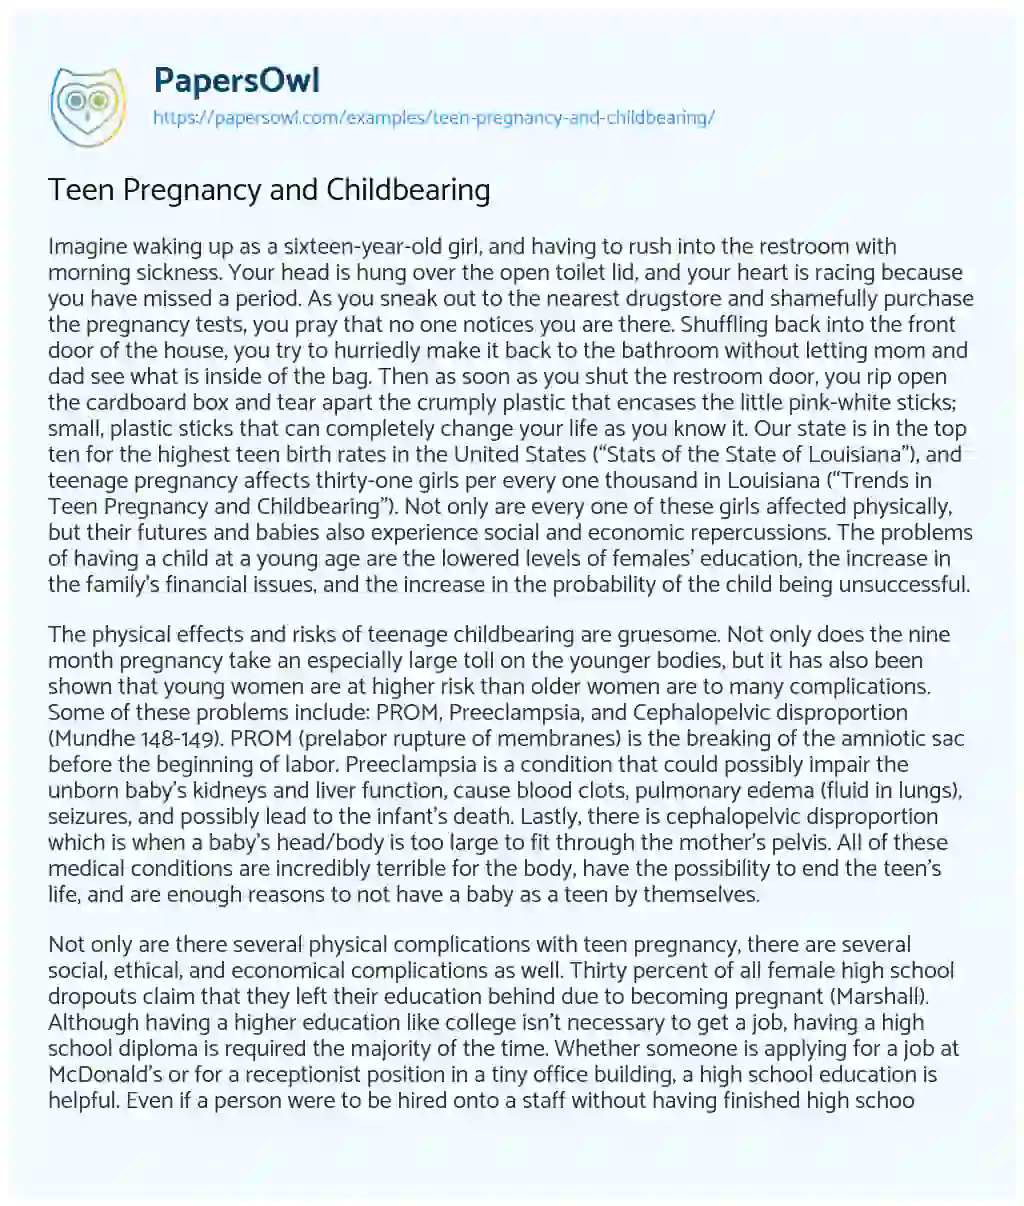 Essay on Teen Pregnancy and Childbearing